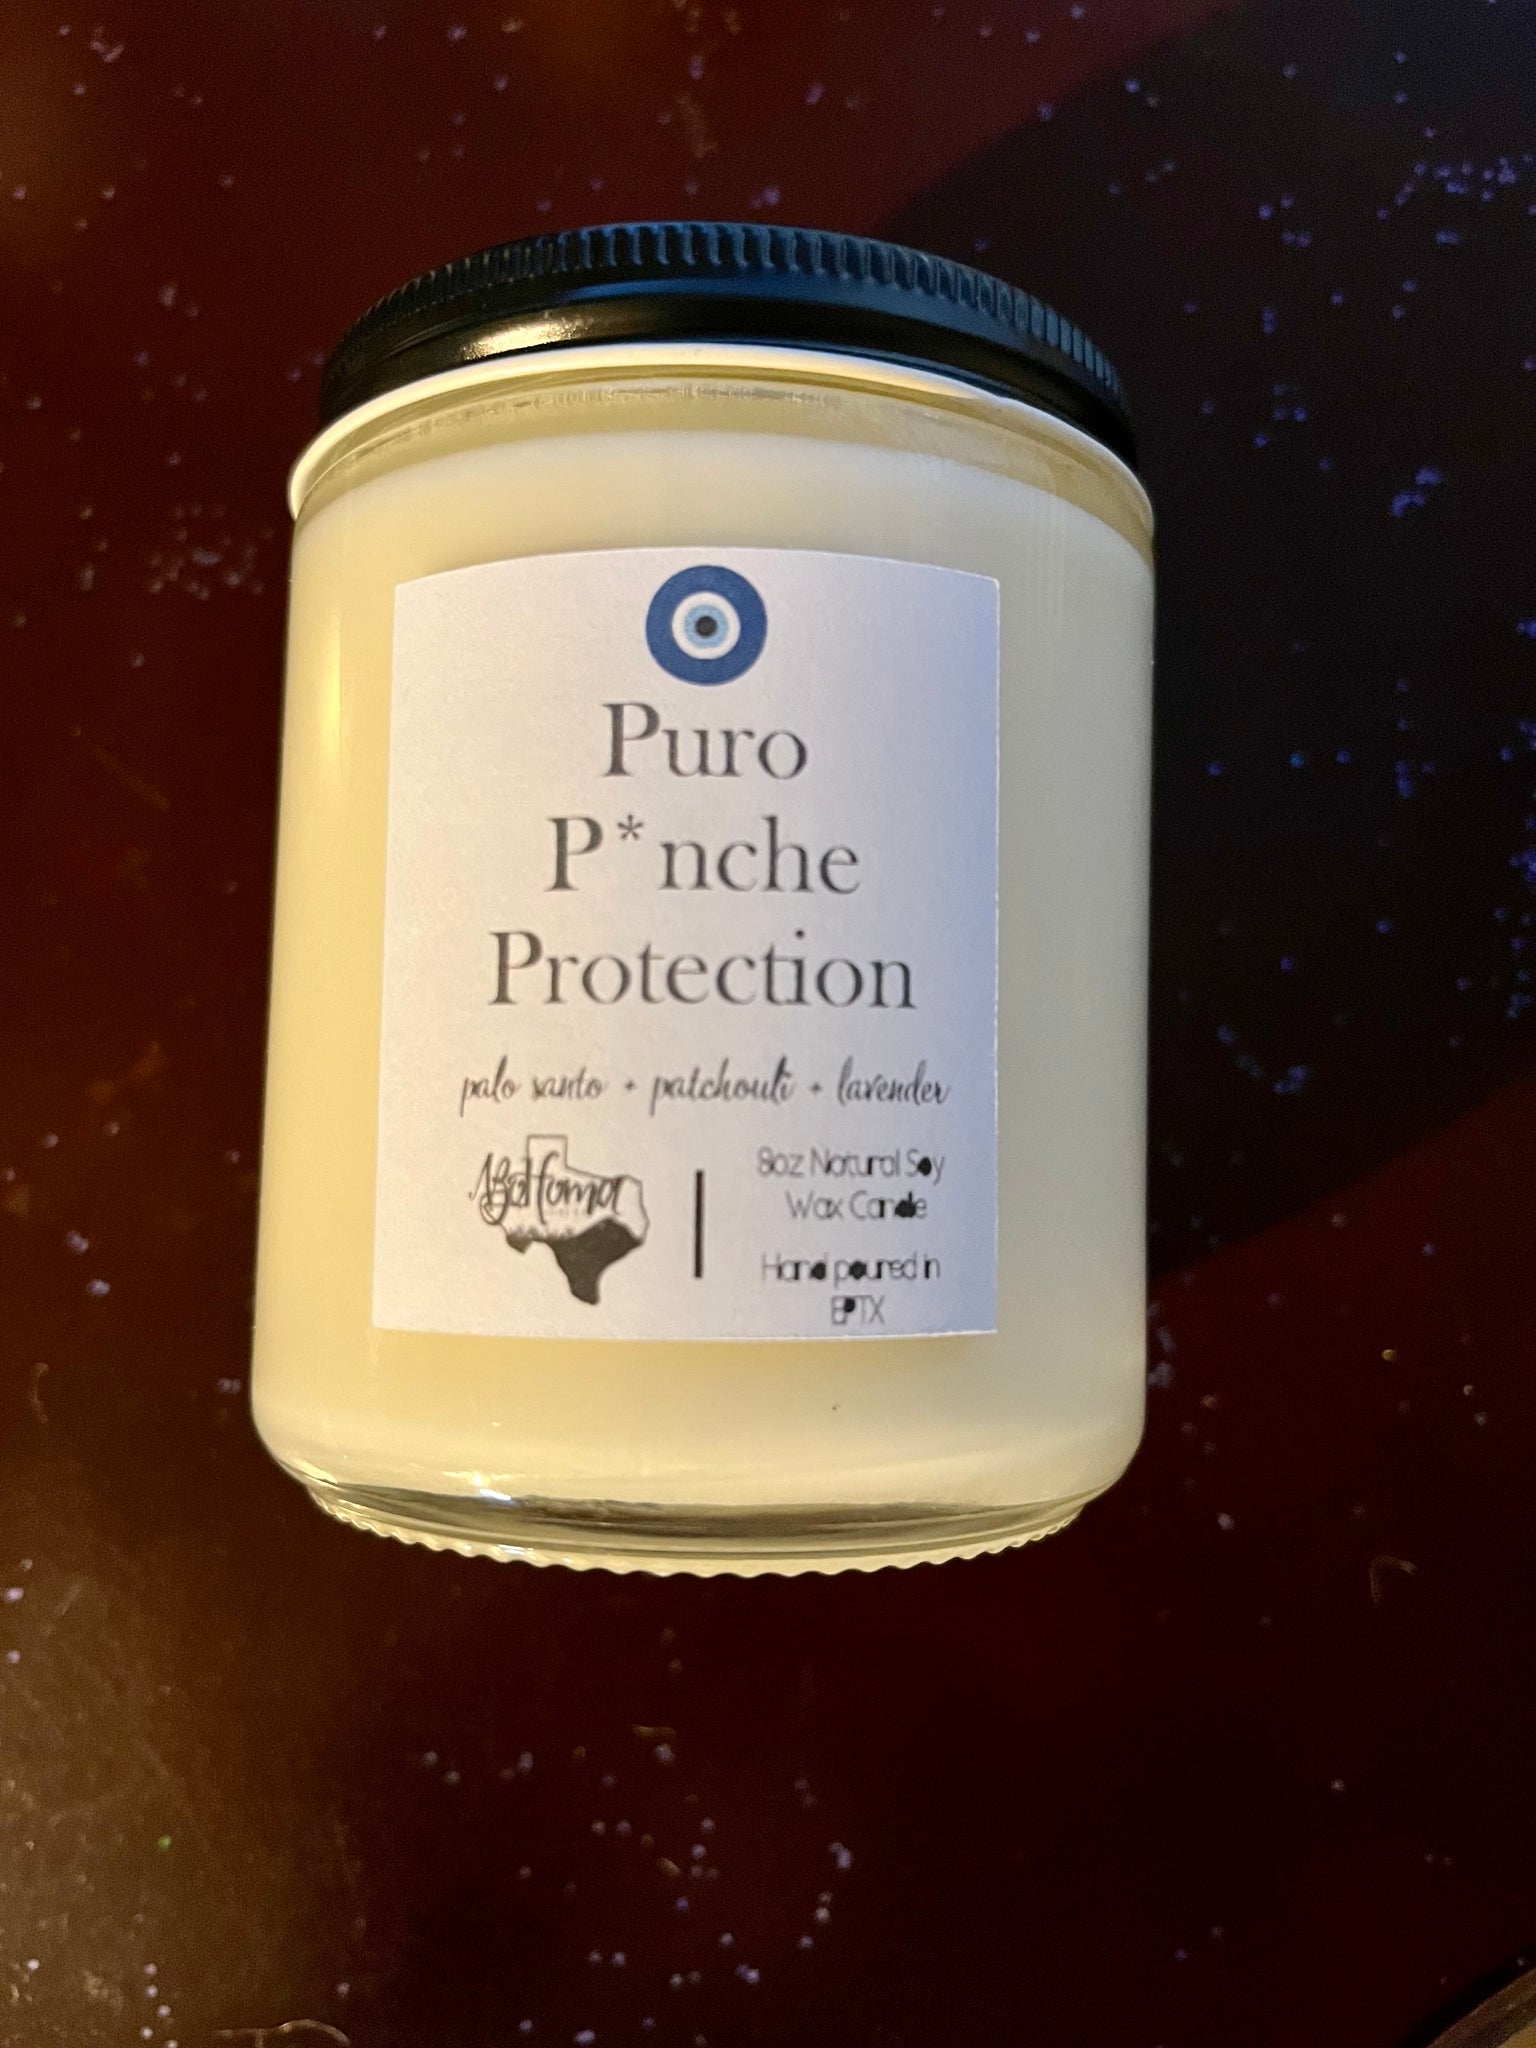 Puro P*nche Protection 8oz Candle